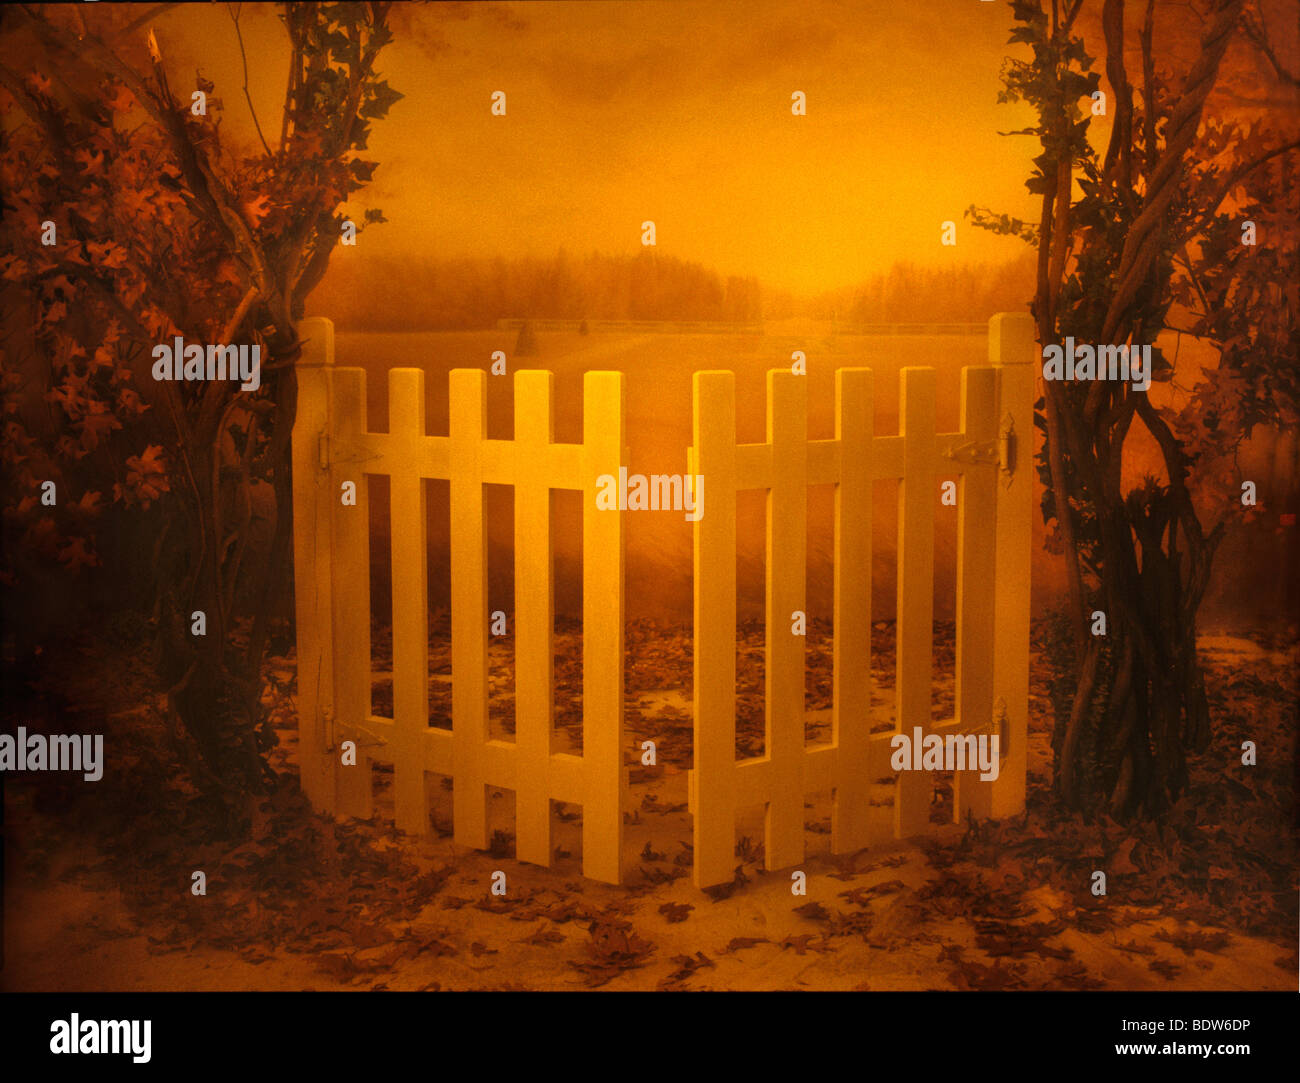 View of an opened farm gate at sunset, this was shot in the studio with props Stock Photo